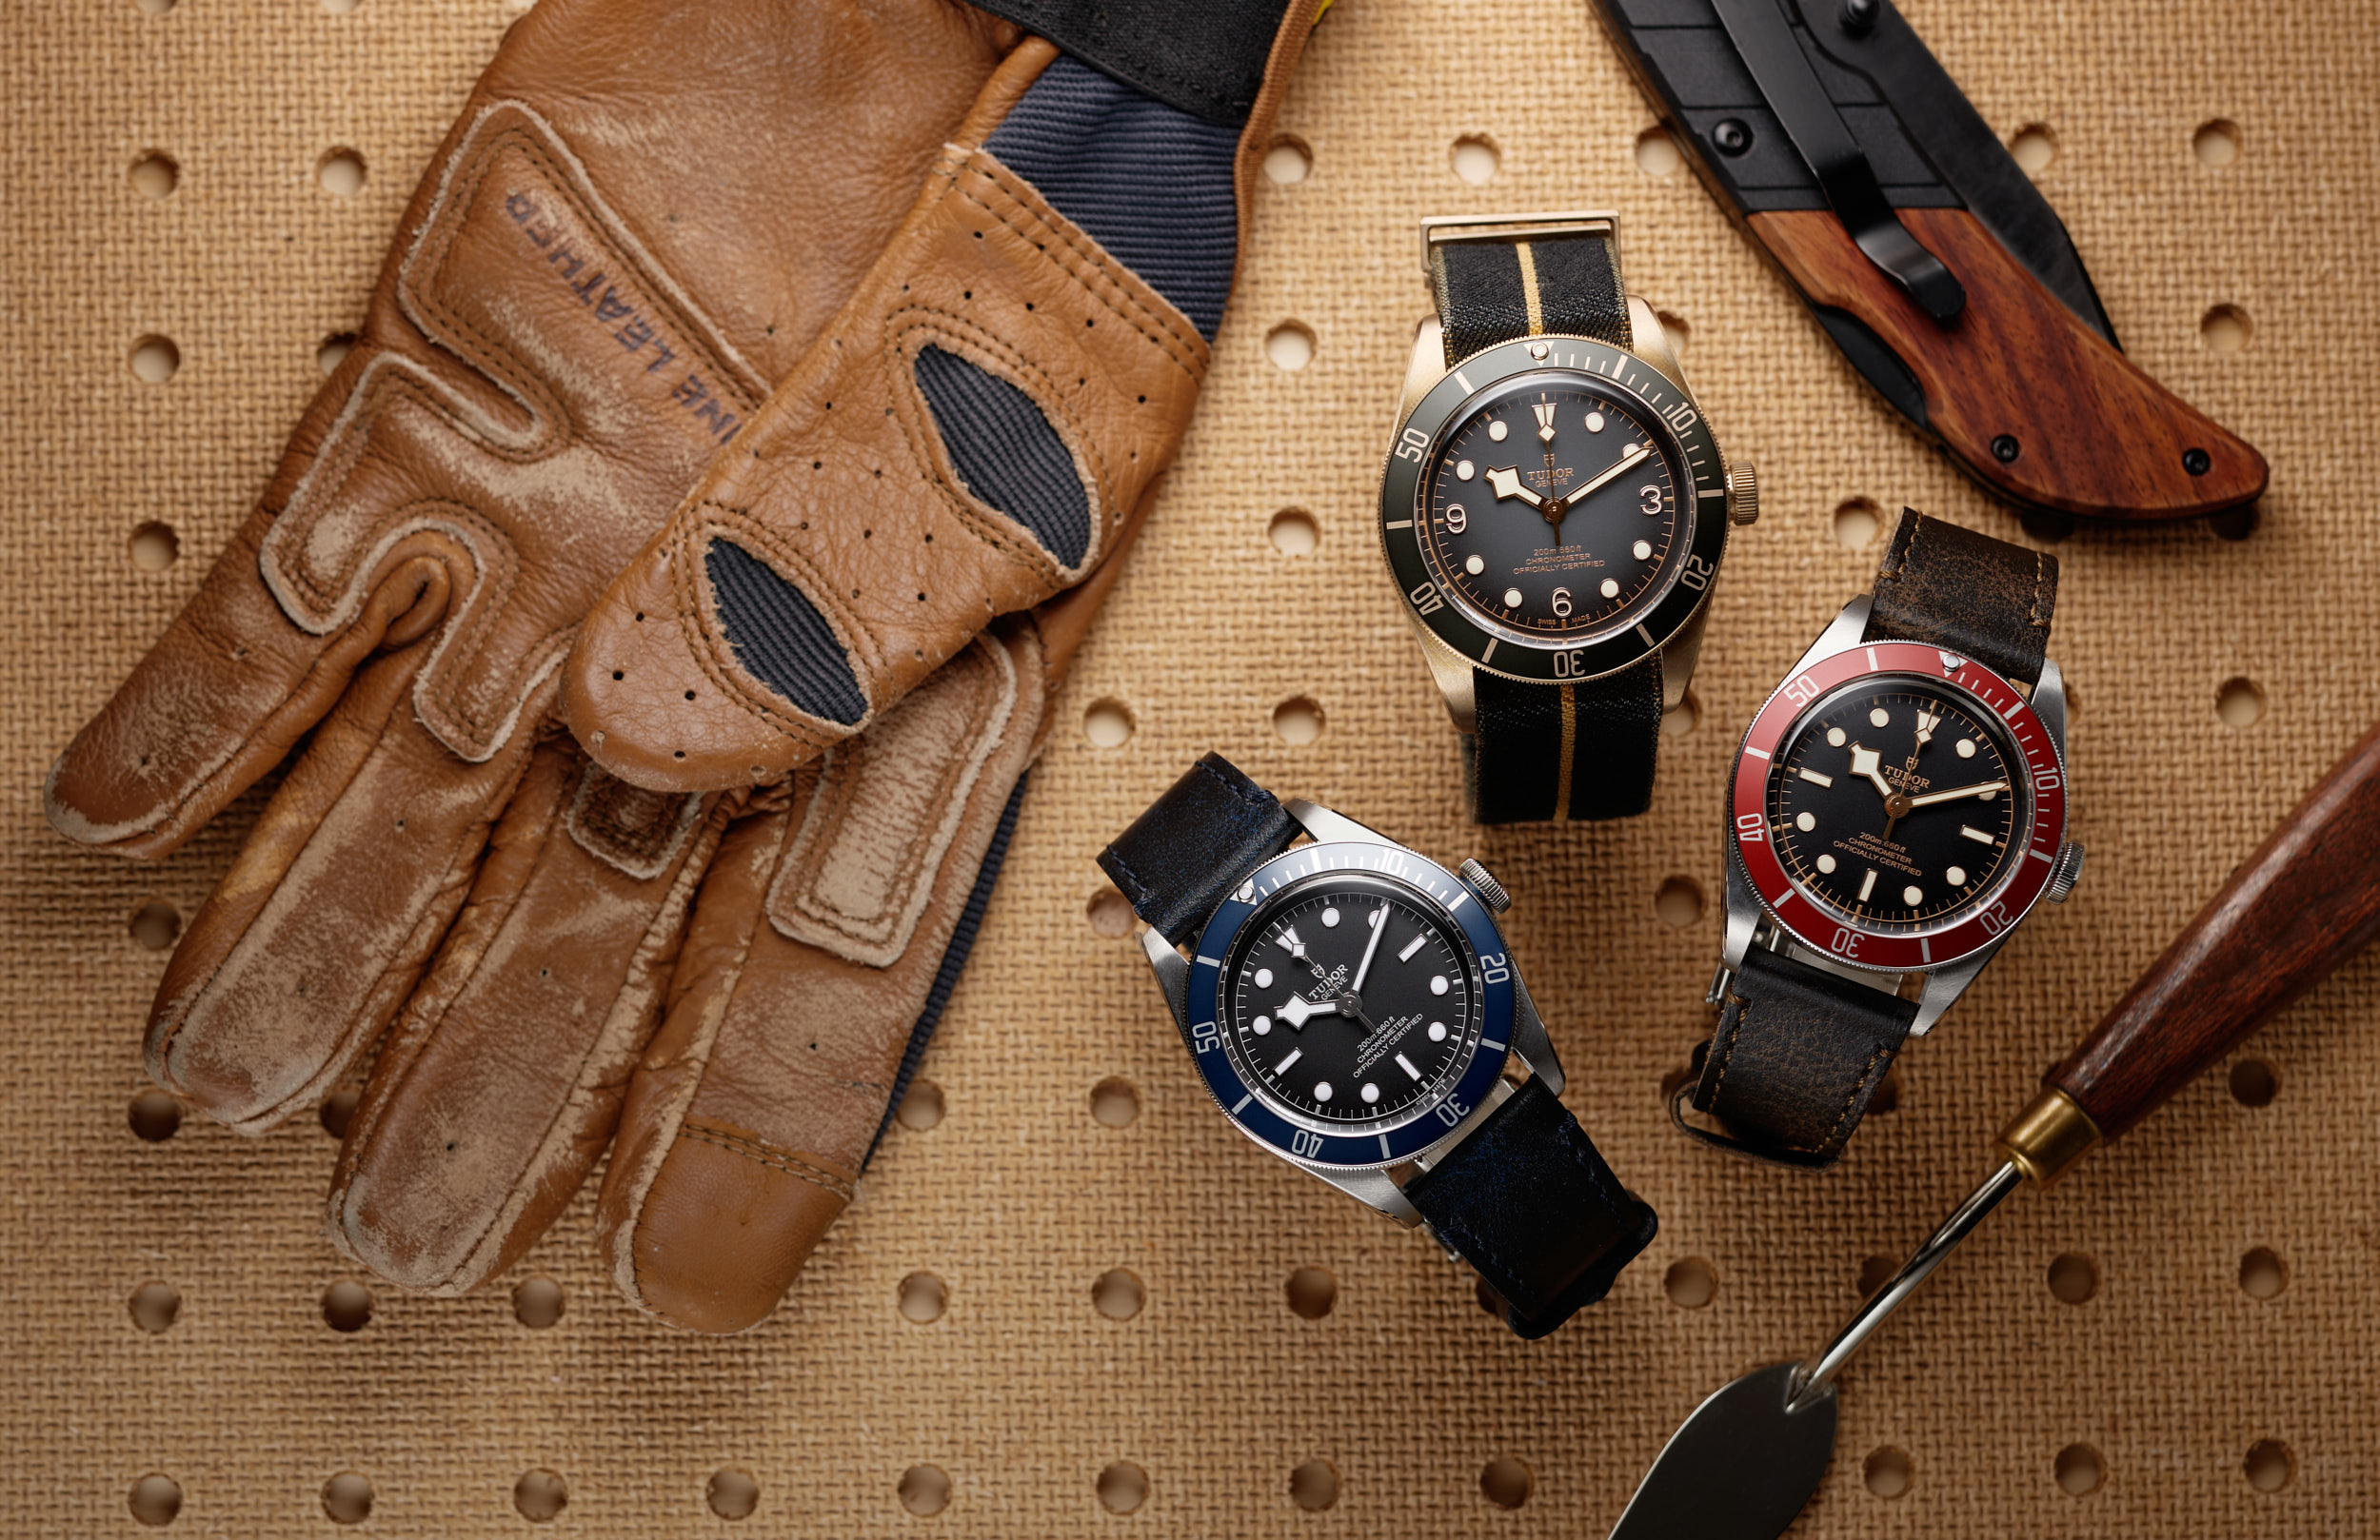 Father's Day Watch Gifts for working father. Tudor Watches surrounded by a working glove, pocket knife, and a putty knife for the Watch Standard. 